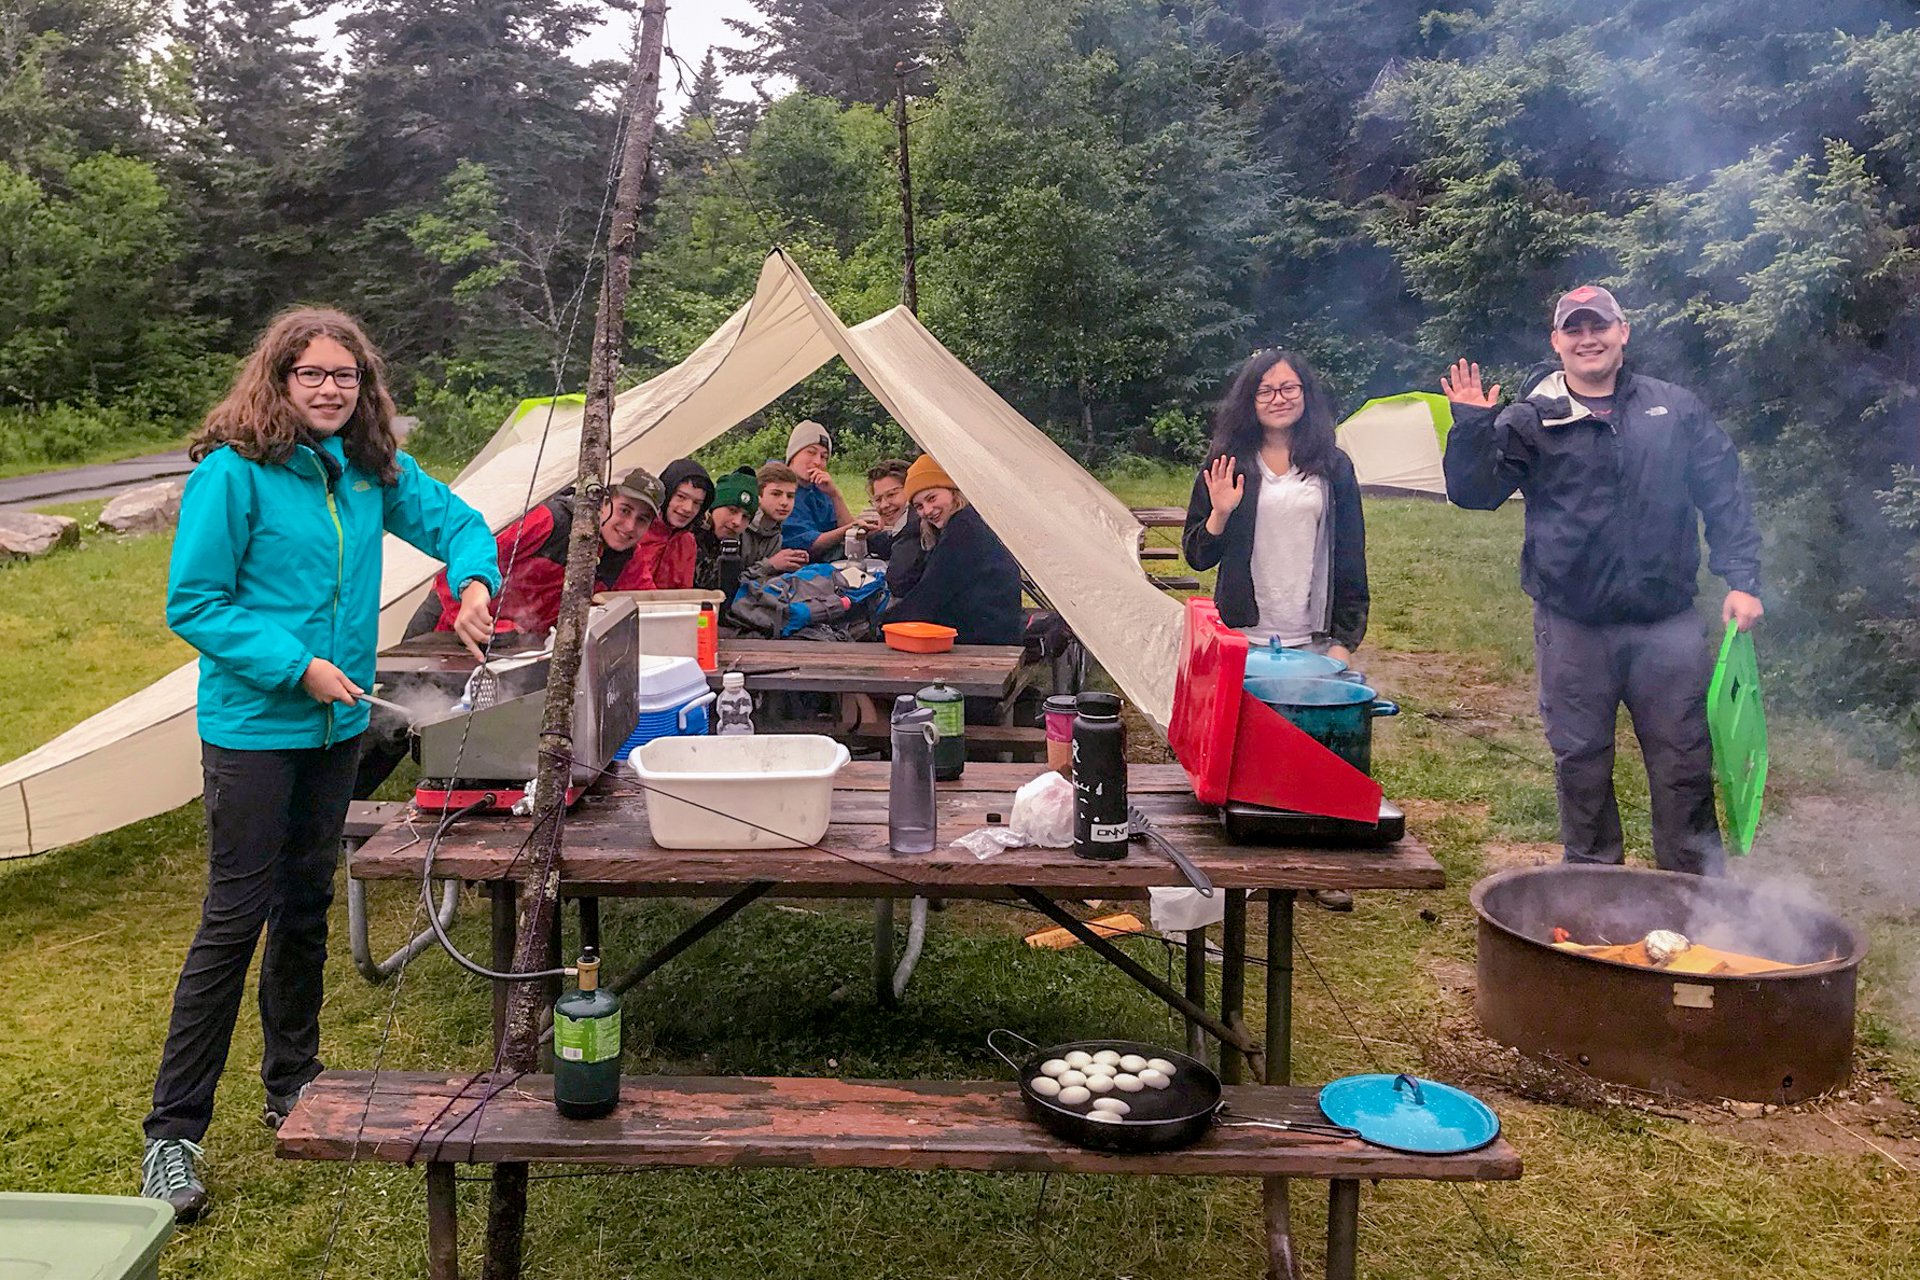 Wildwood teen adventure trip campers (trekkers) at a campsite with a tent shelter, picnic table, and a fire ring, cooking a meal together